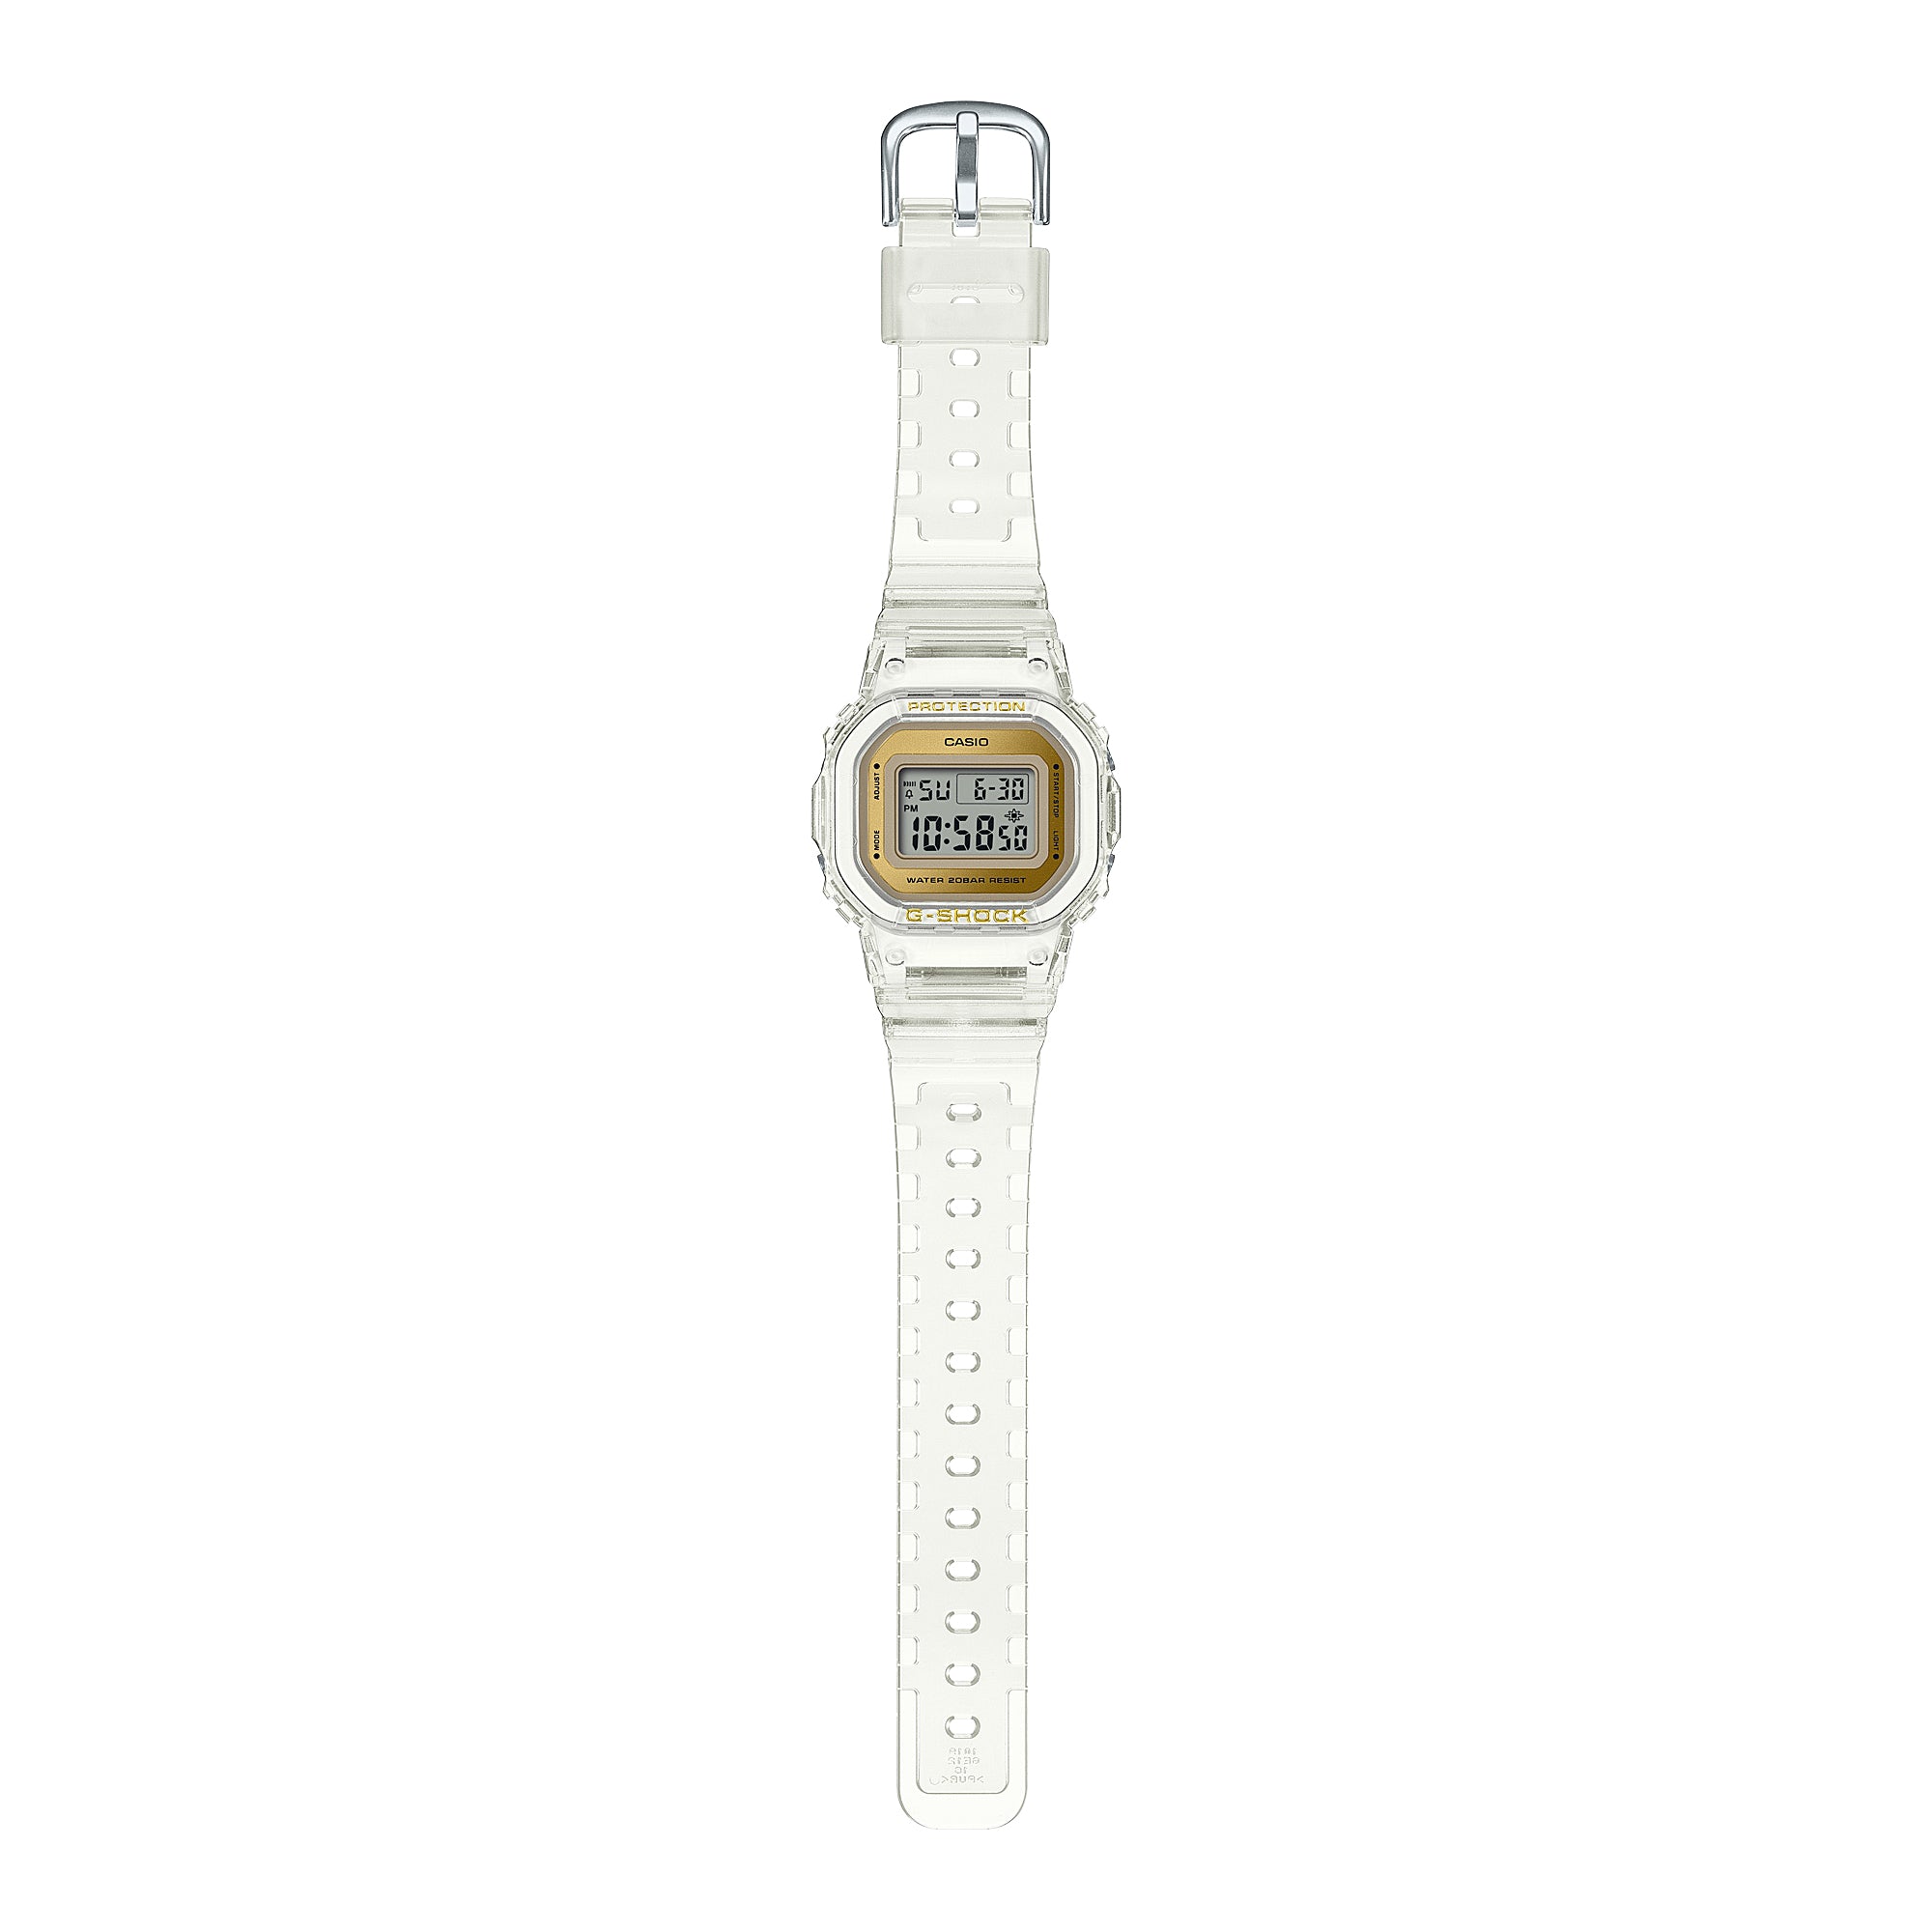 Casio G-Shock for Ladies' Translucent Resin Band Watch GMDS5600SG-7D GMD-S5600SG-7D GMD-S5600SG-7